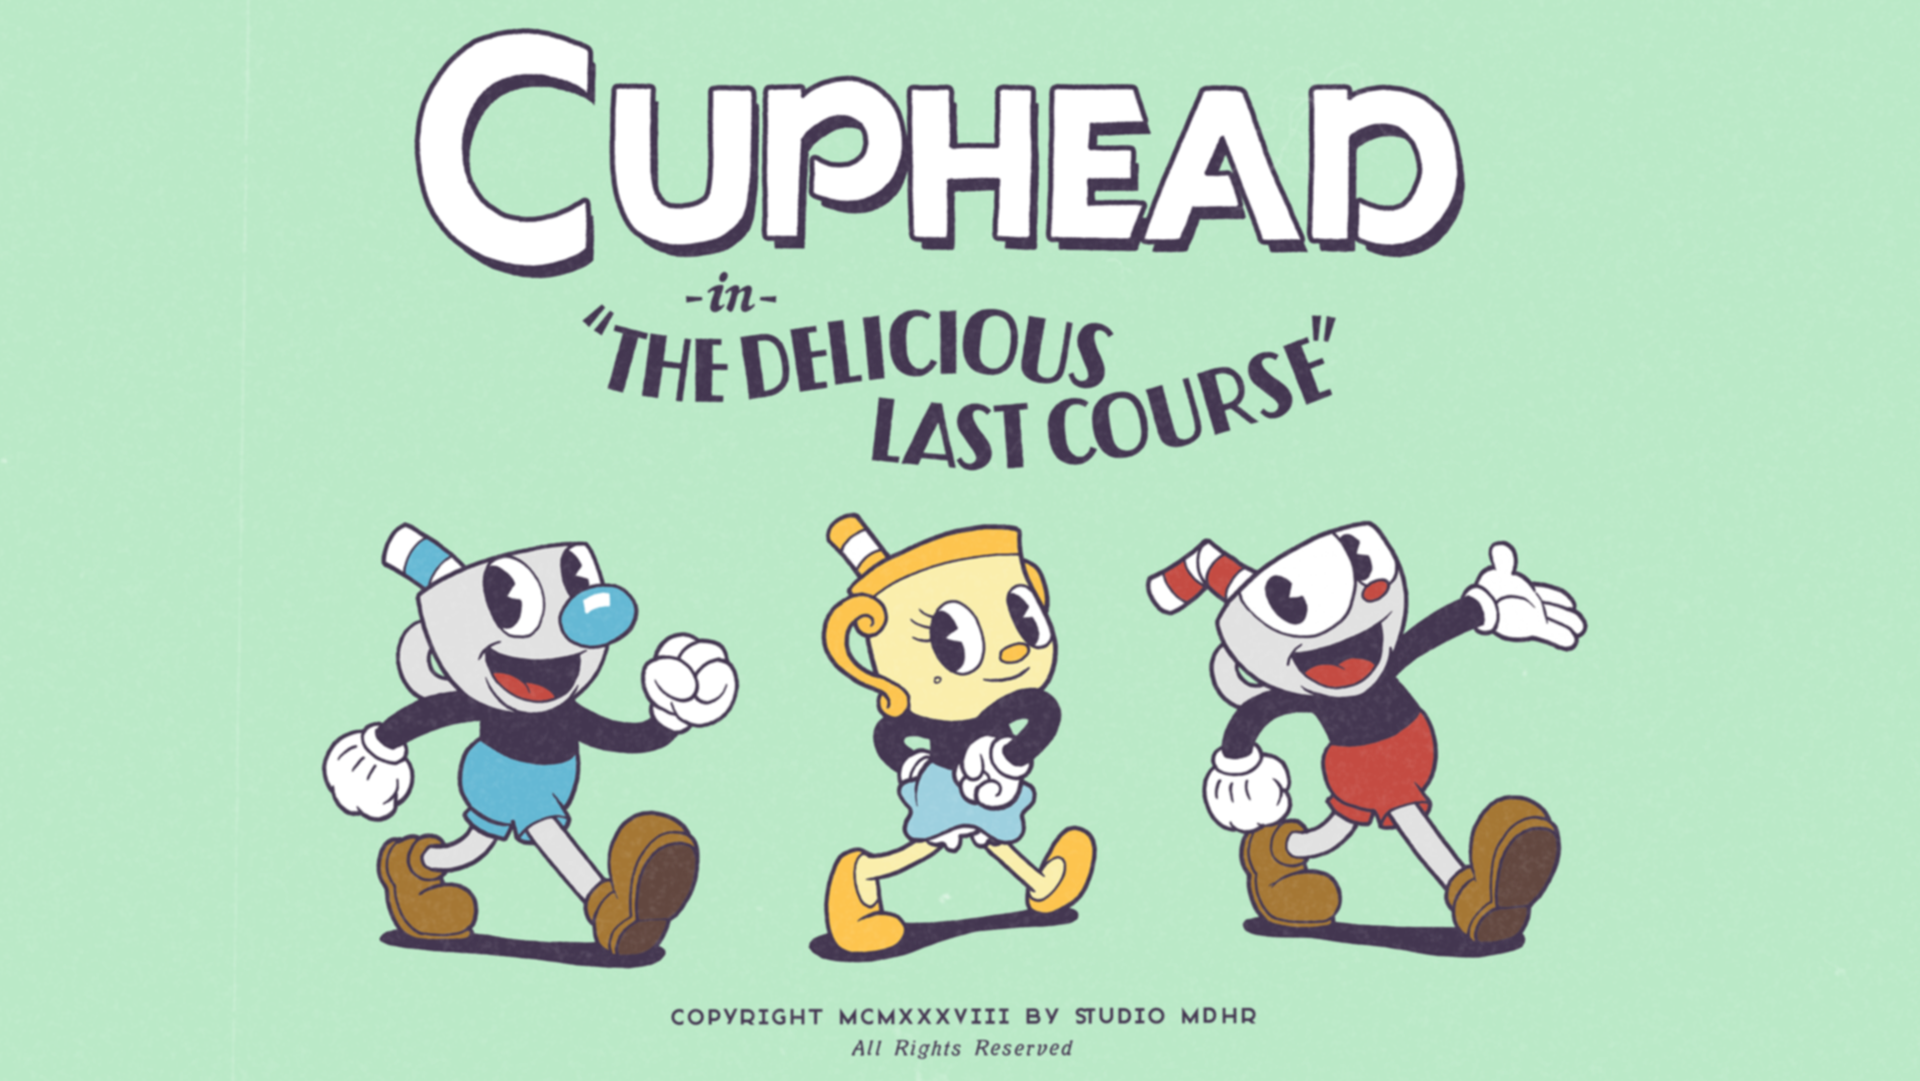 Image for Cuphead's Delicious Last Course offers depth over breadth